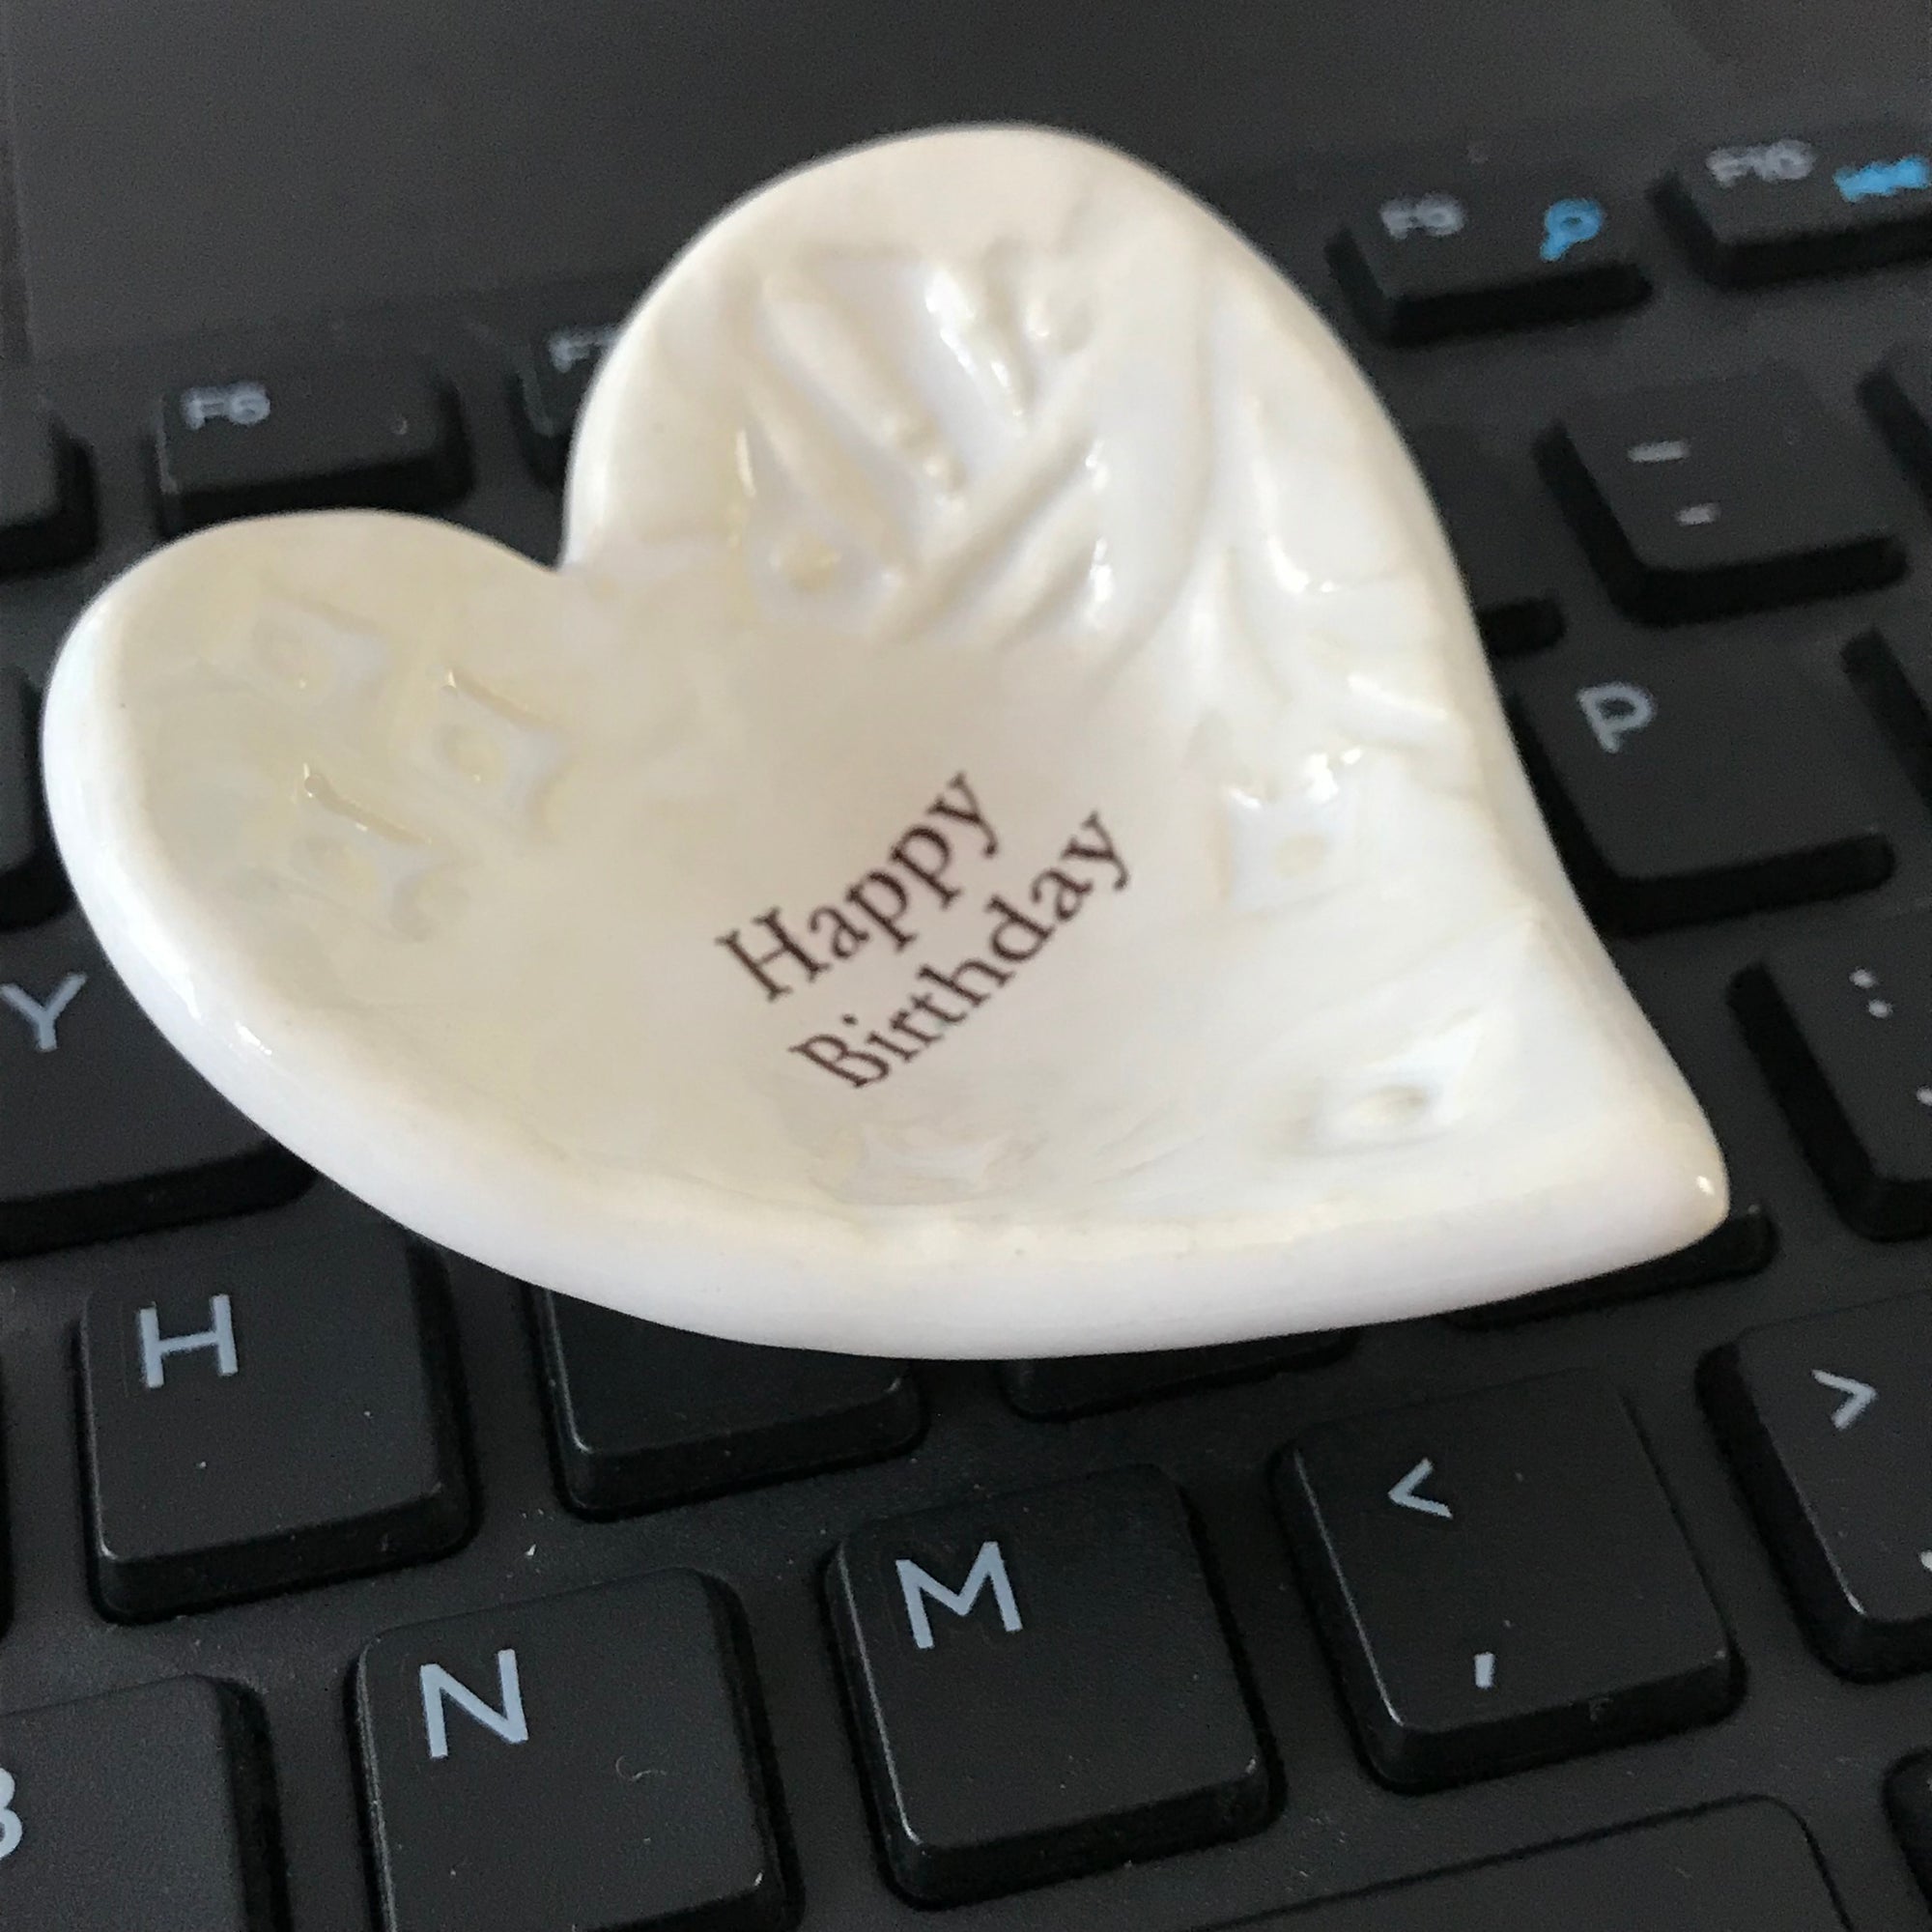 Here's a wonderful birthday gift for her.  A Giving Heart inscribed with the words "Happy Birthday".  Most people use it as a ring dish.  